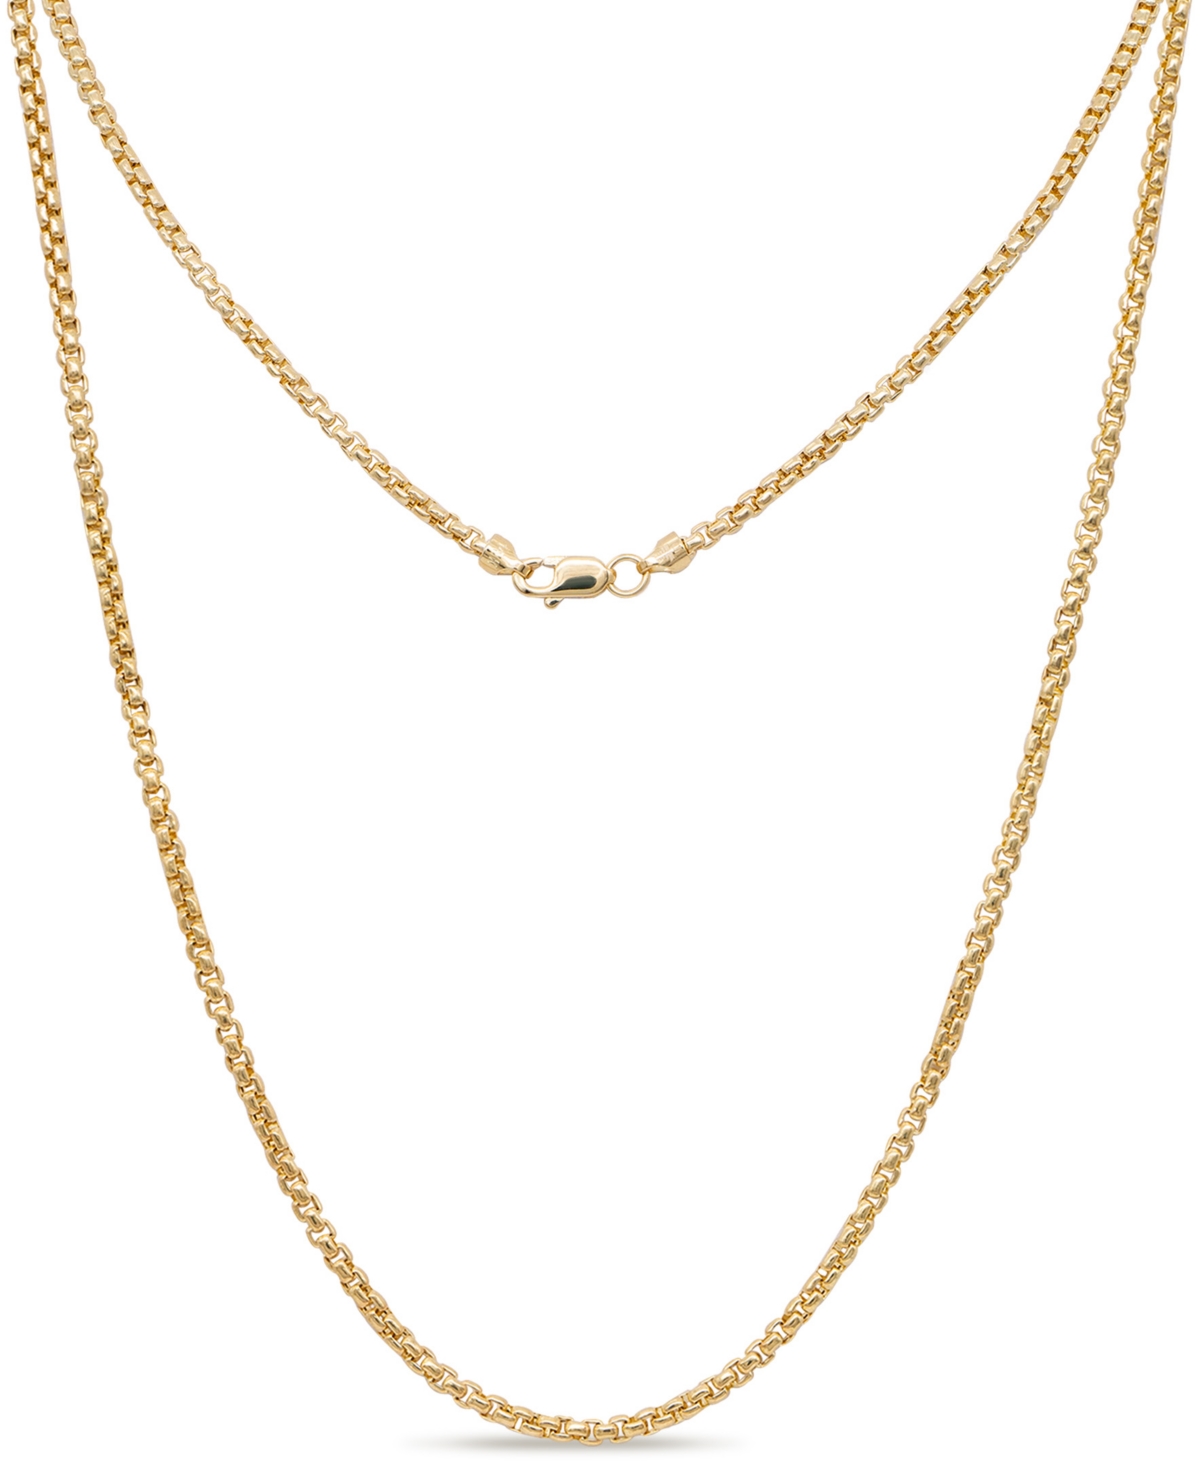 14K Gold Box Round 2mm Chain Necklace, 24", approx. 5.2grams - Gold